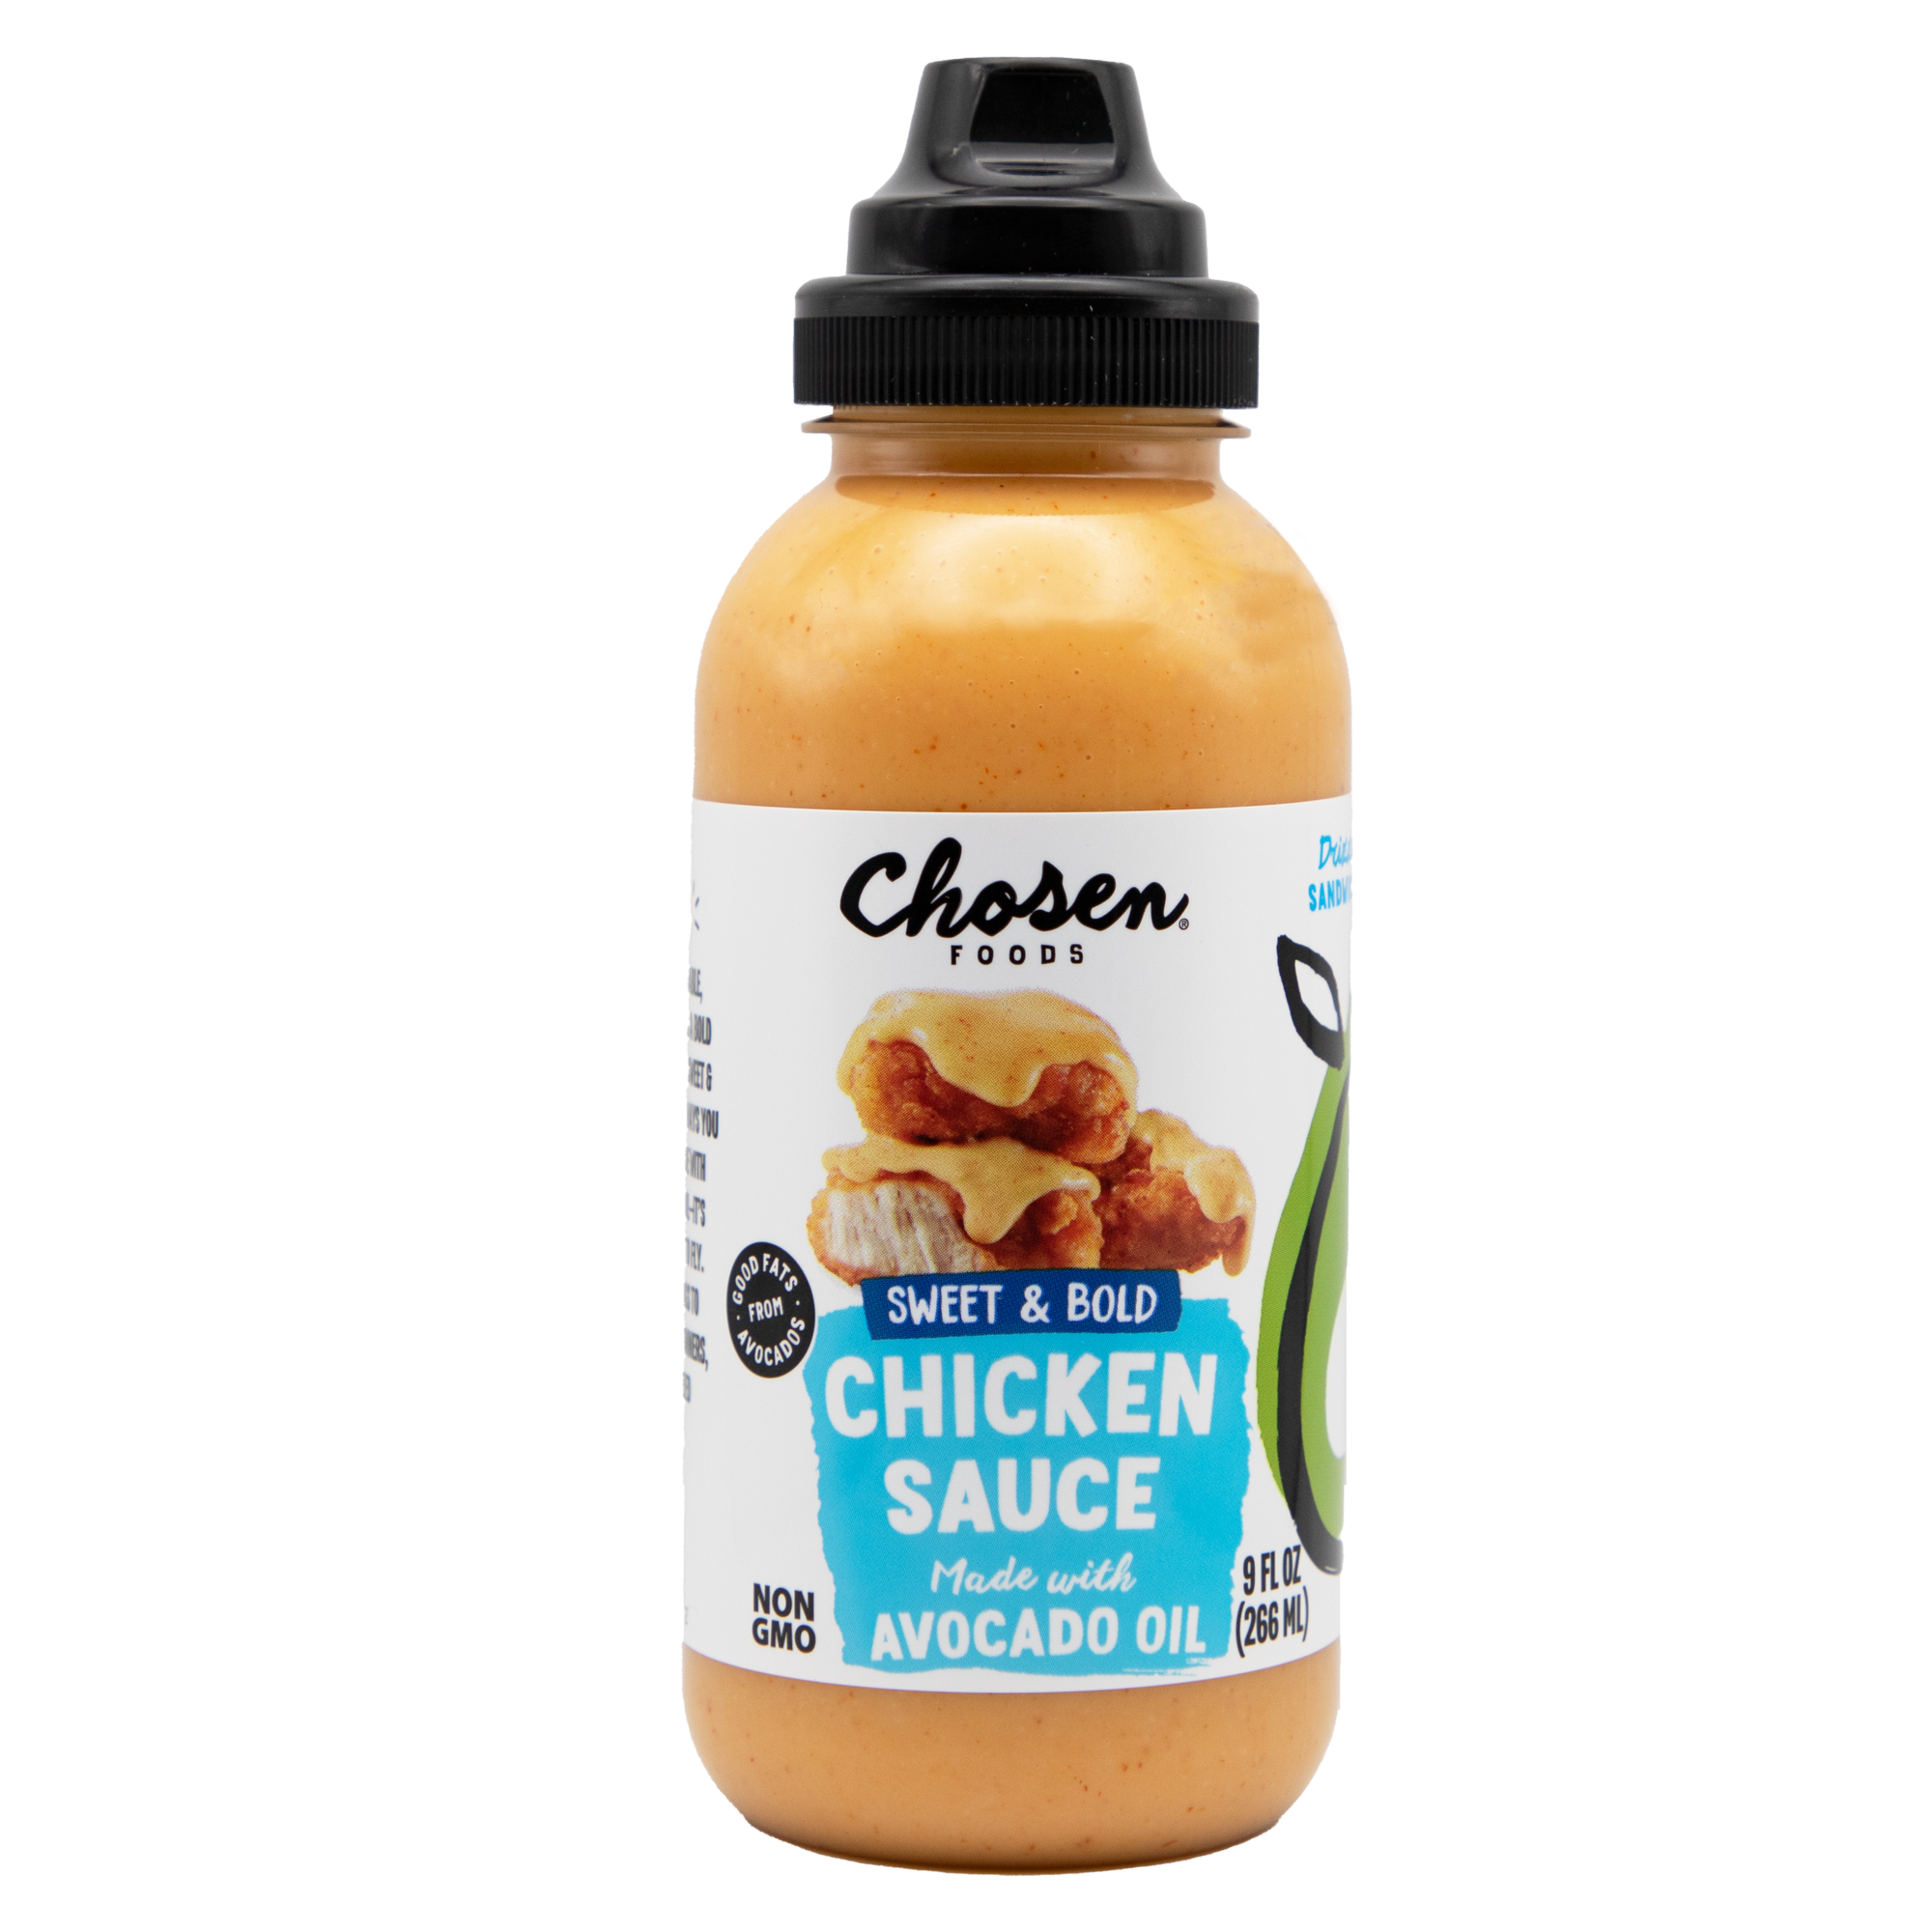 Chicken Sauce made with 100% Pure Avocado Oil